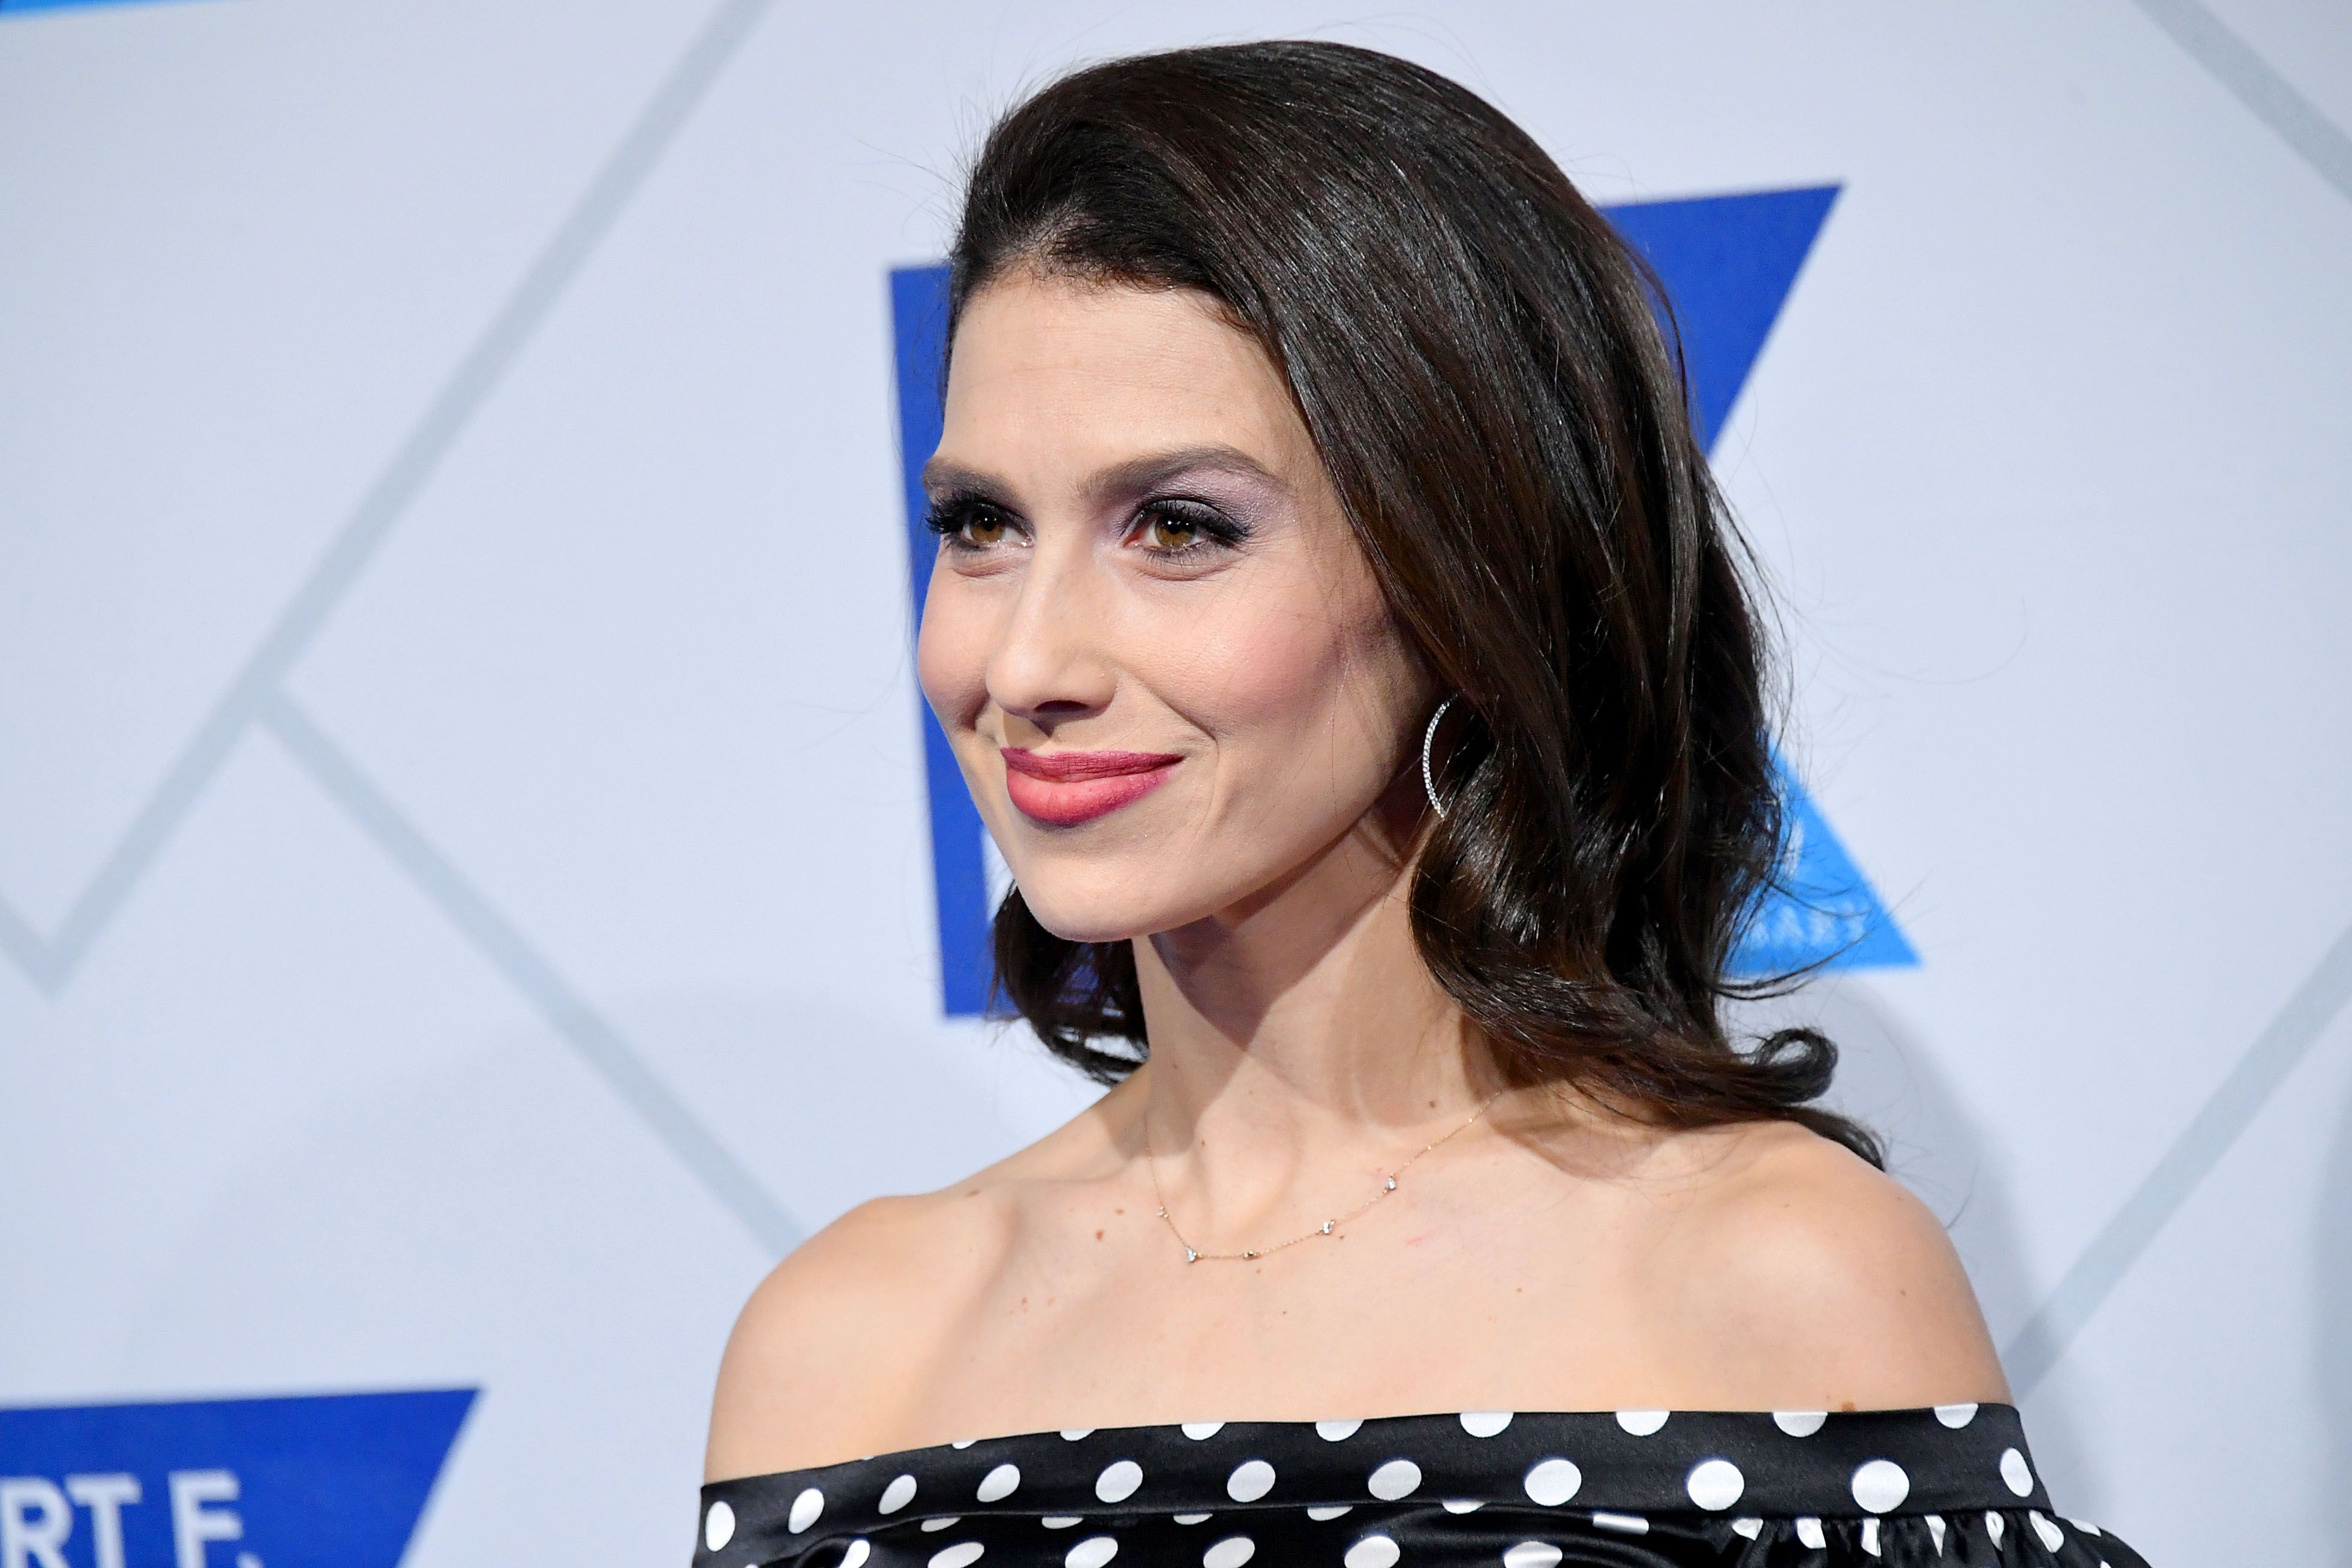 Hilaria Baldwin at the 2018 Robert F. Kennedy Human Rights' Ripple Of Hope Awards at New York Hilton Midtown on December 12, 2018 | Photo: Getty Images